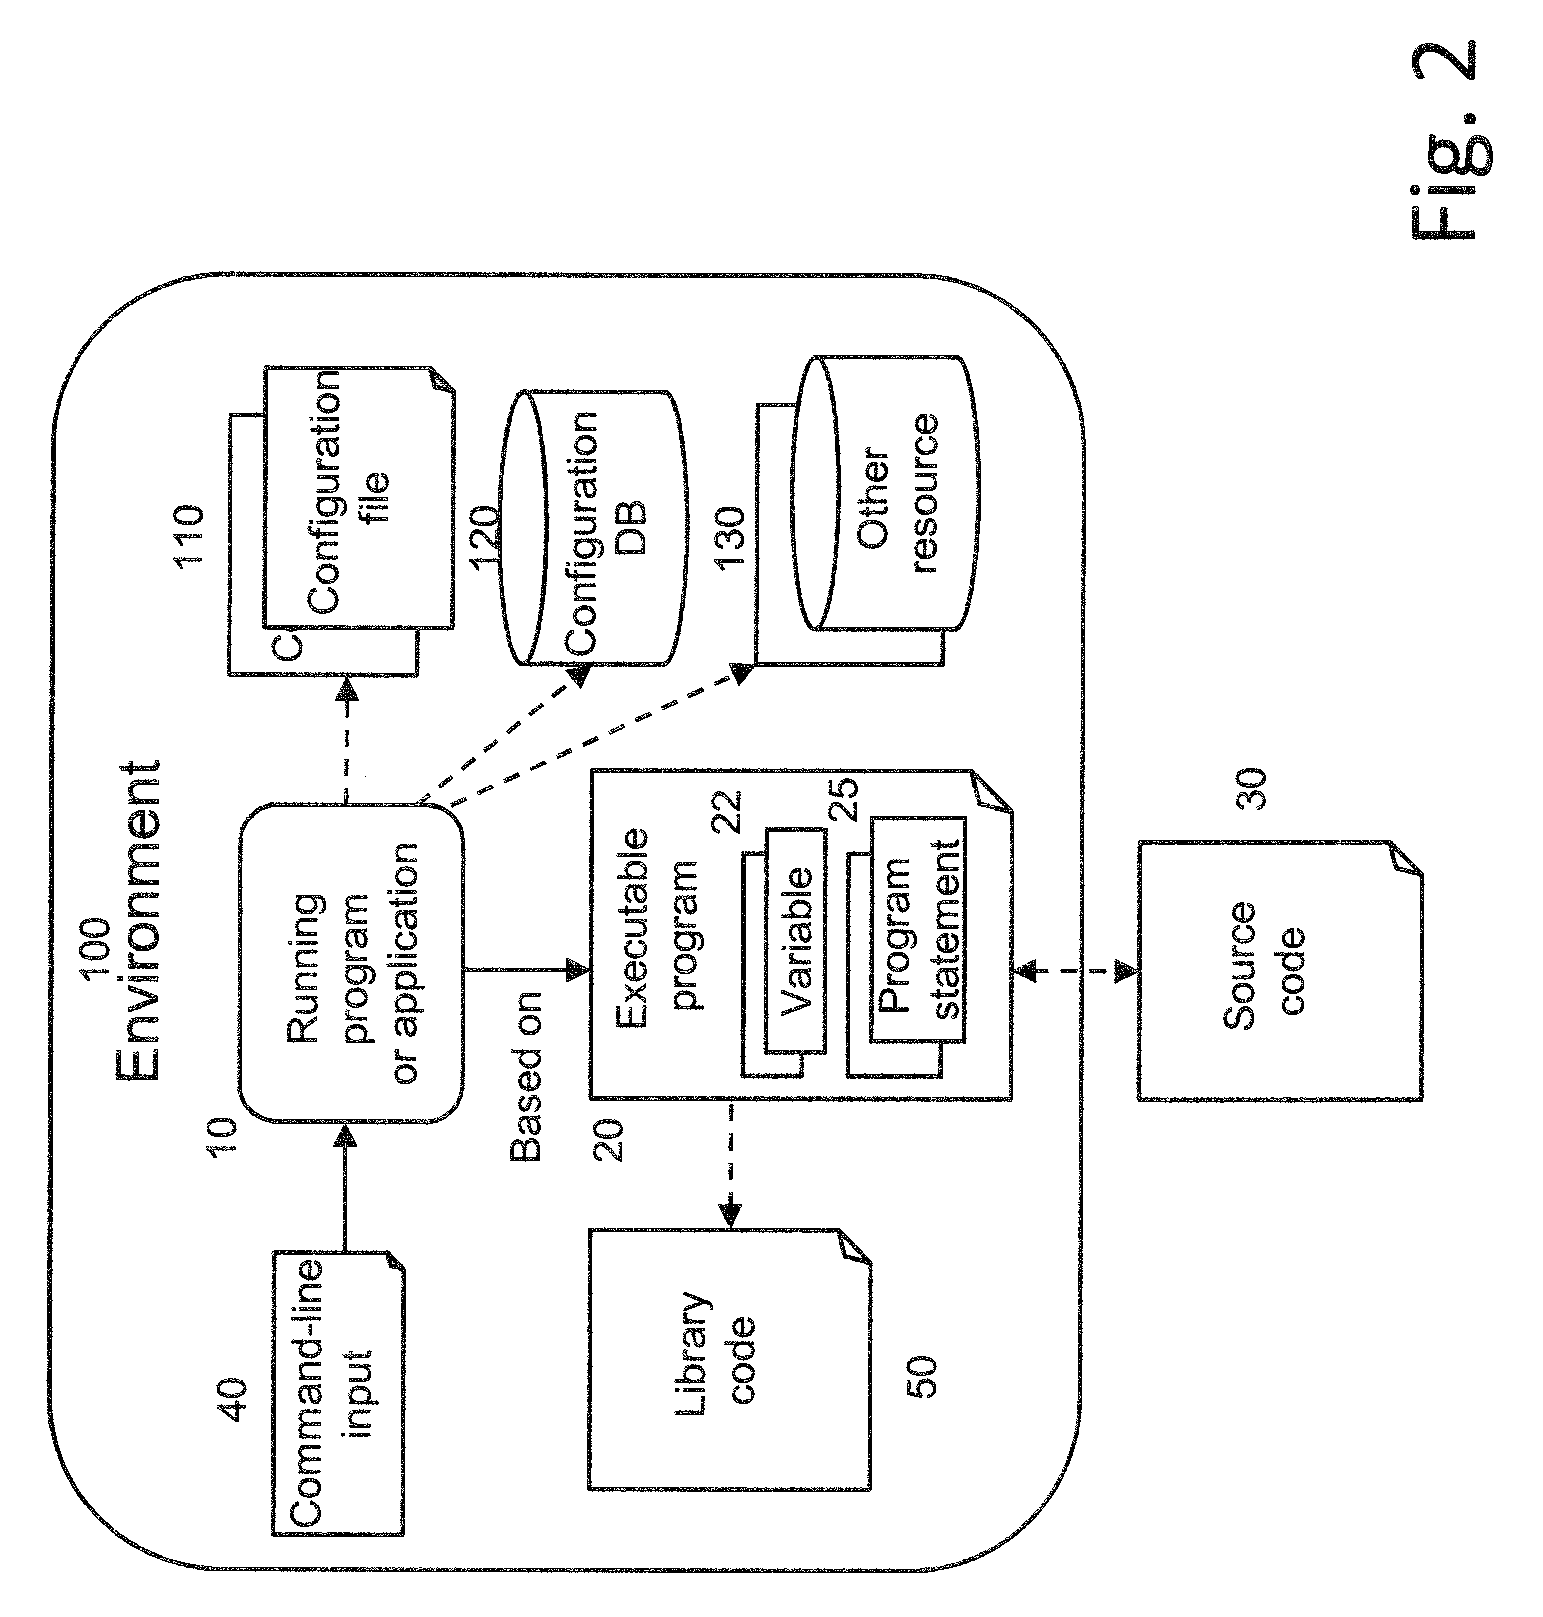 Method and system to discover possible program variable values by connecting program value extraction with external data sources